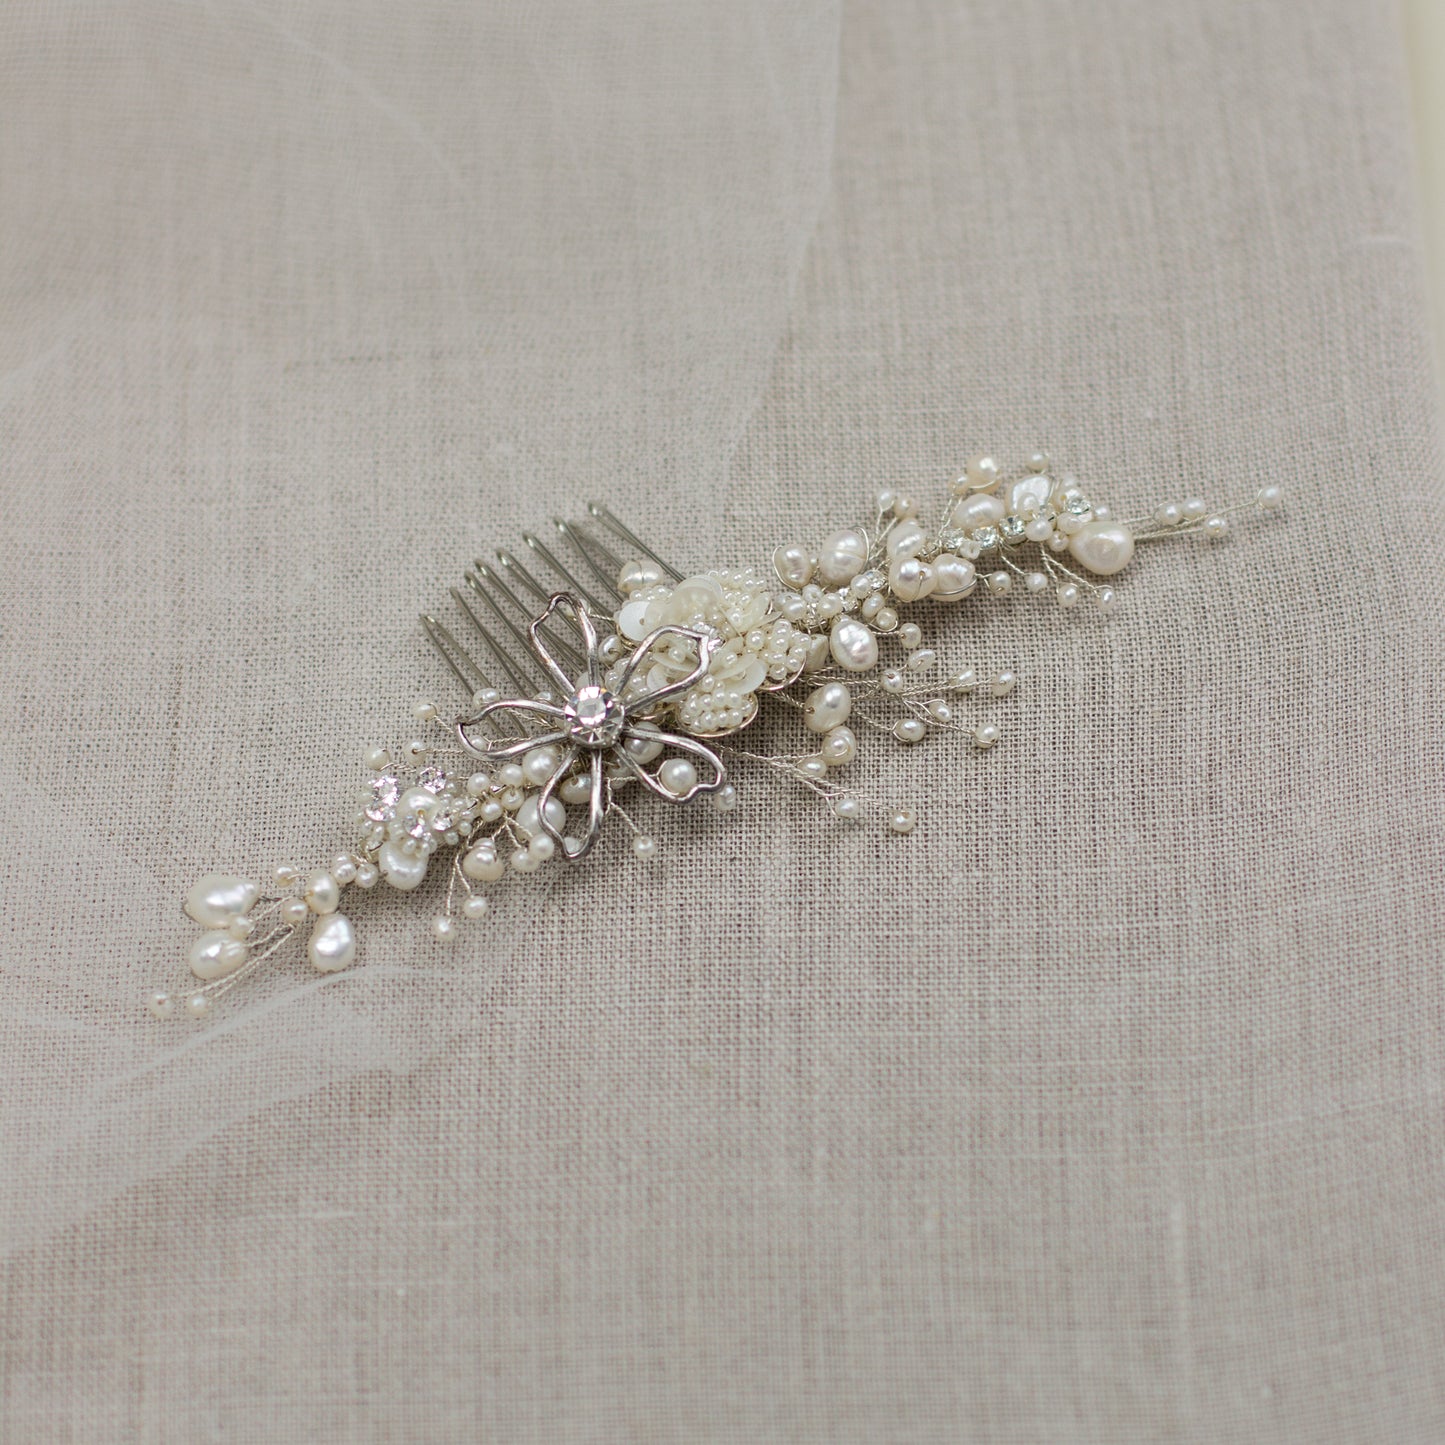 Explore unique handmade bridal hair accessories at our online boutique in Europe. This beautiful one of a kind pearl hair comb, bridal hair adornment, crystal wedding headpiece feature floral motifs, pearl twigs decorated with crystals. Perfect for your occasion or special day. 